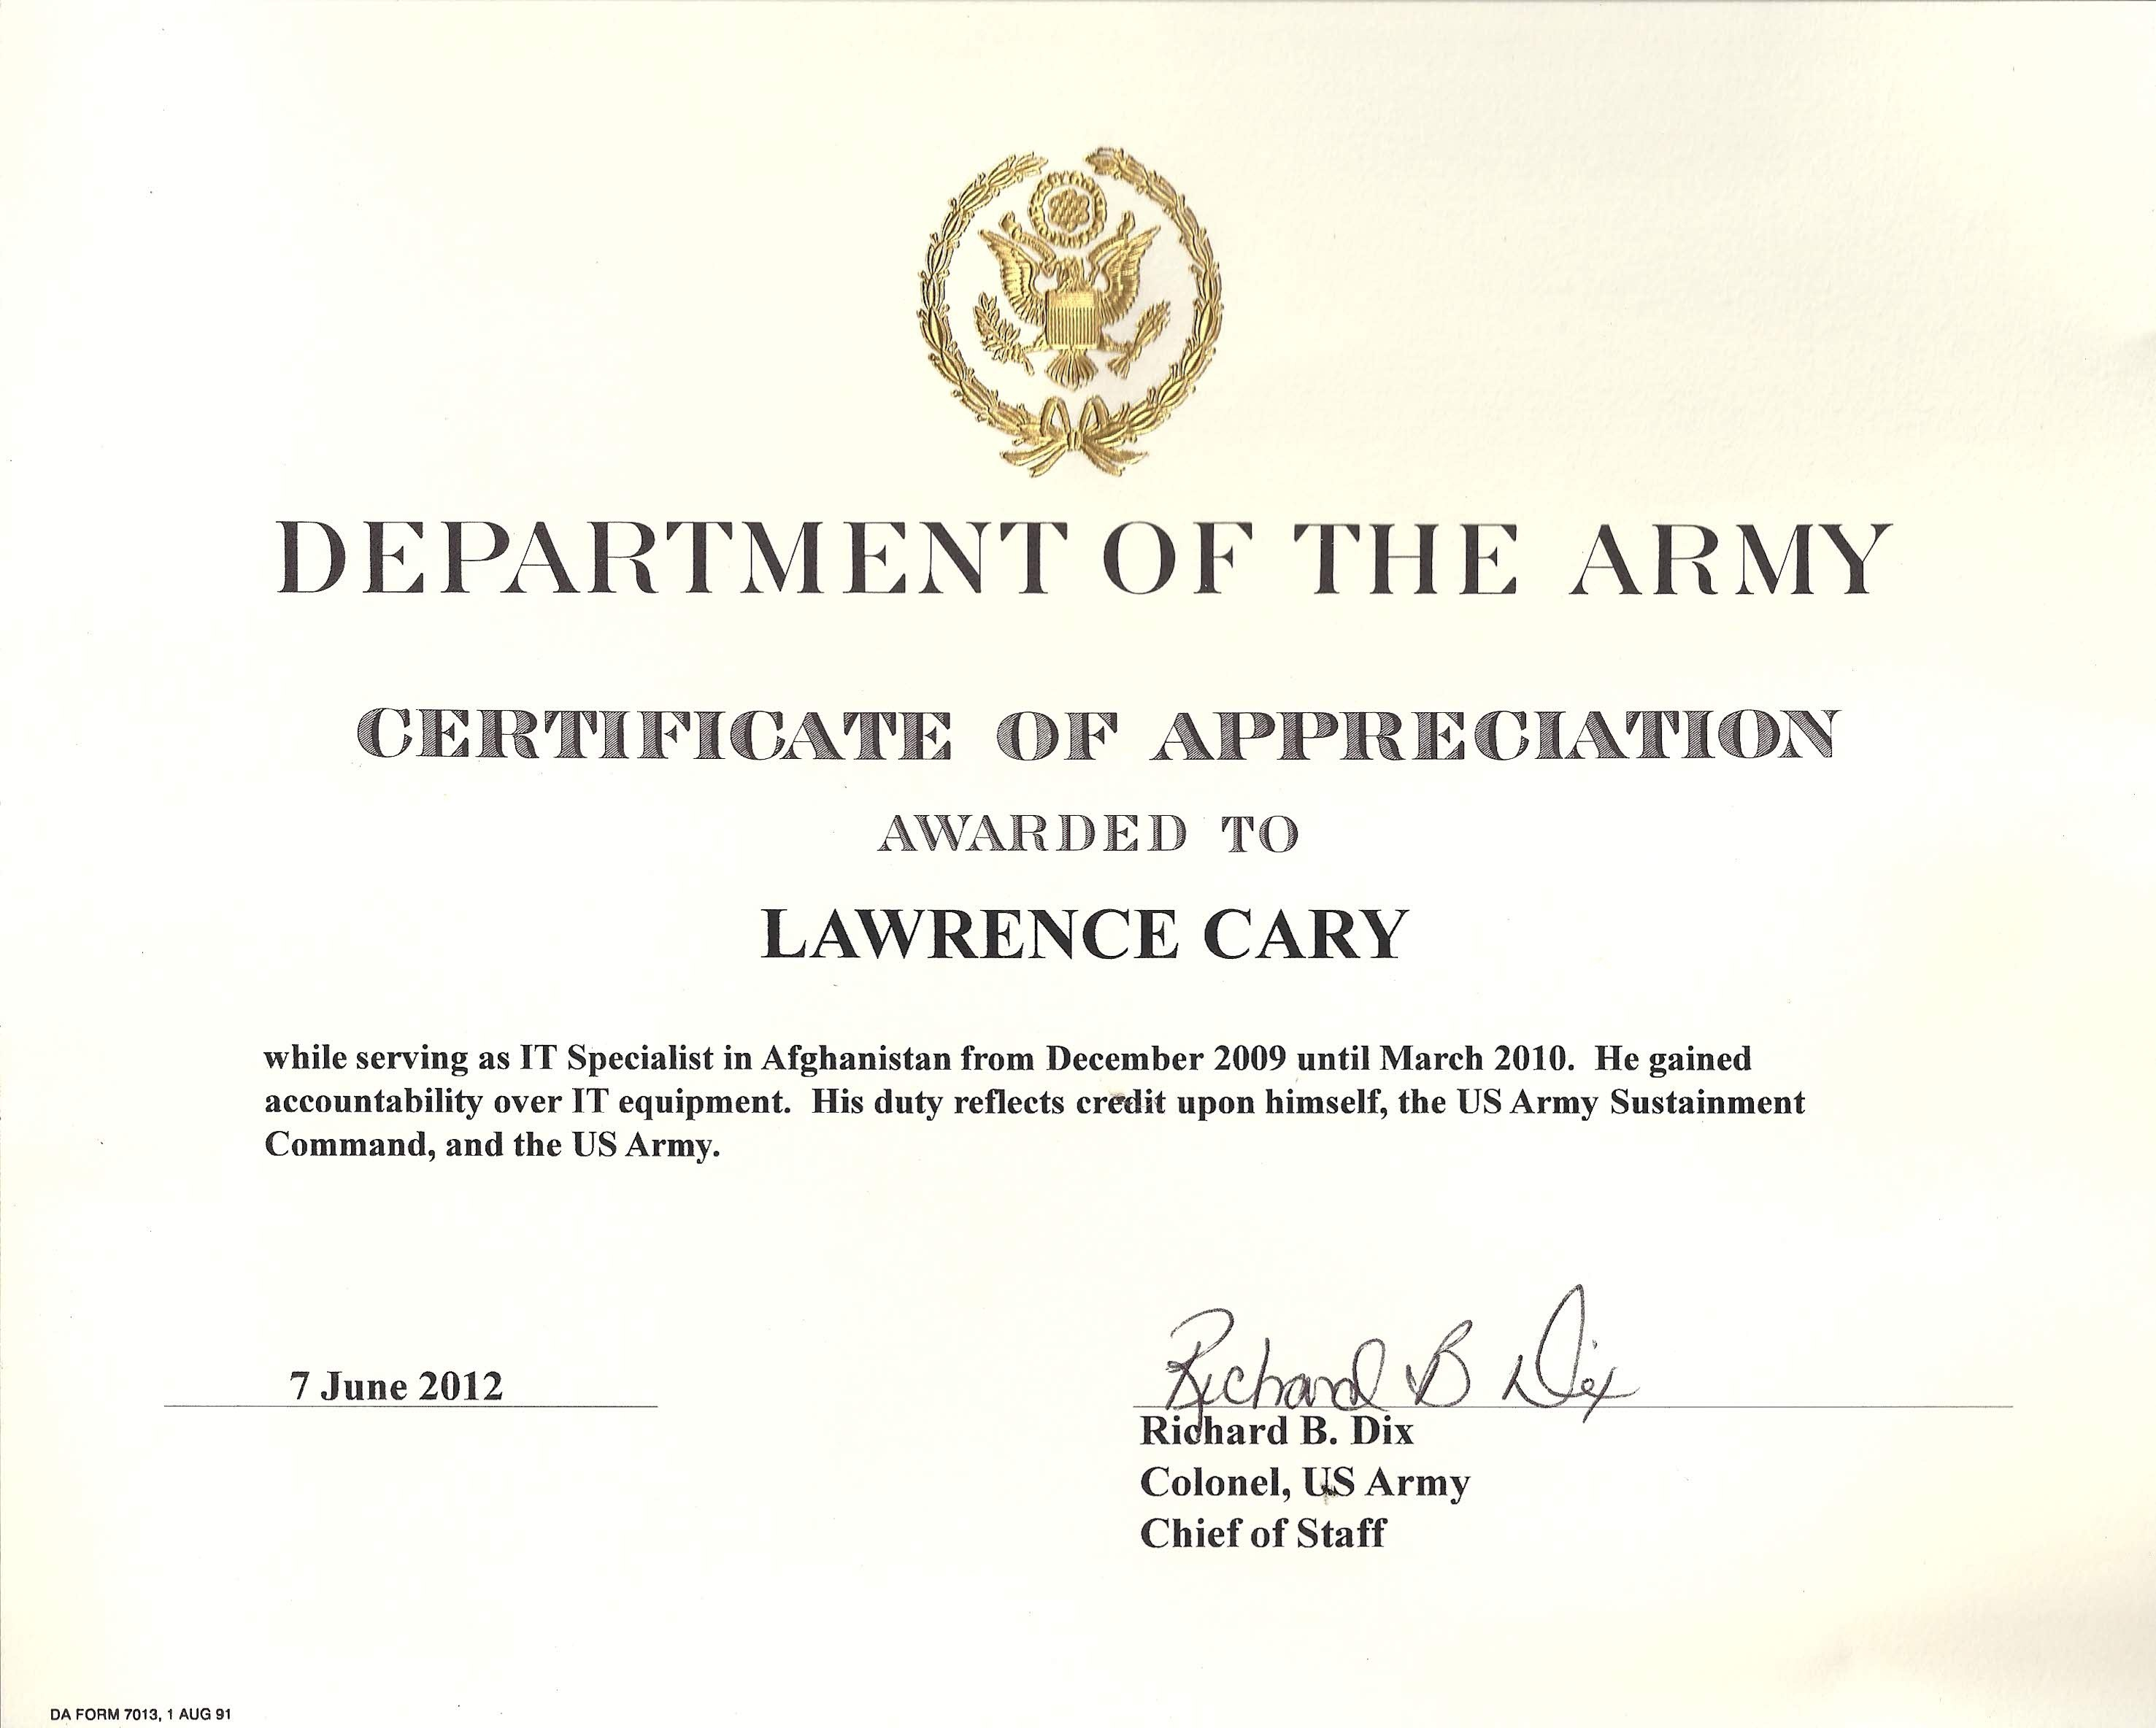 Army Appreciation Certificate Templates  Pdf Docx  Free with Certificate Of Achievement Army Template